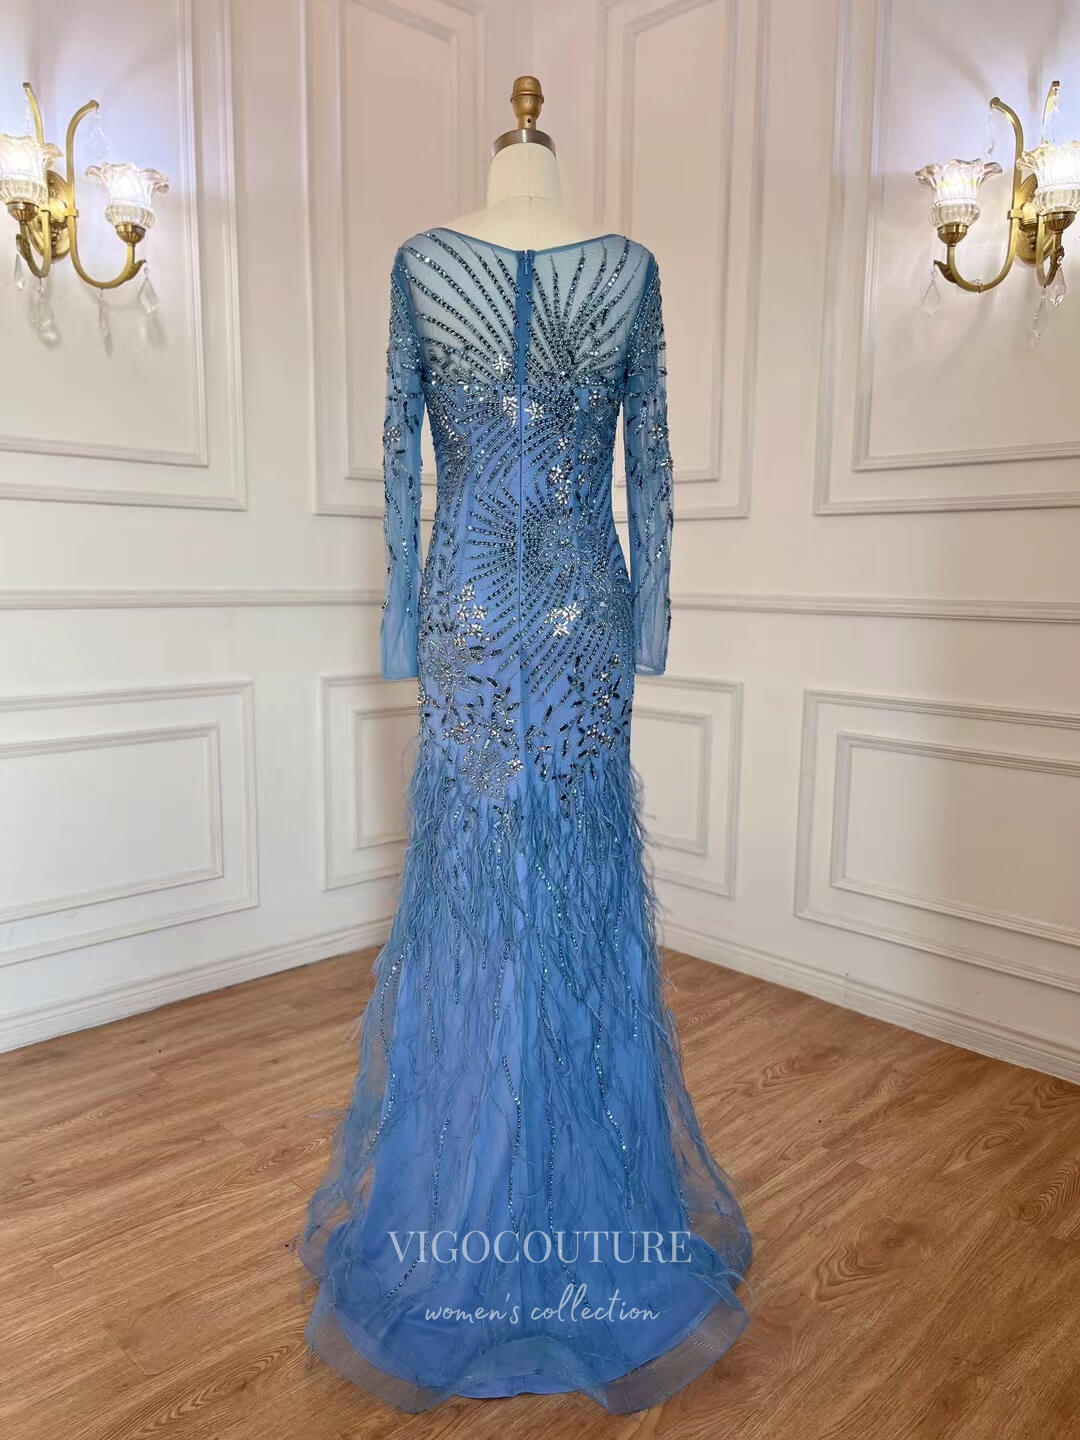 vigocouture Vintage Beaded Feather Prom Dresses